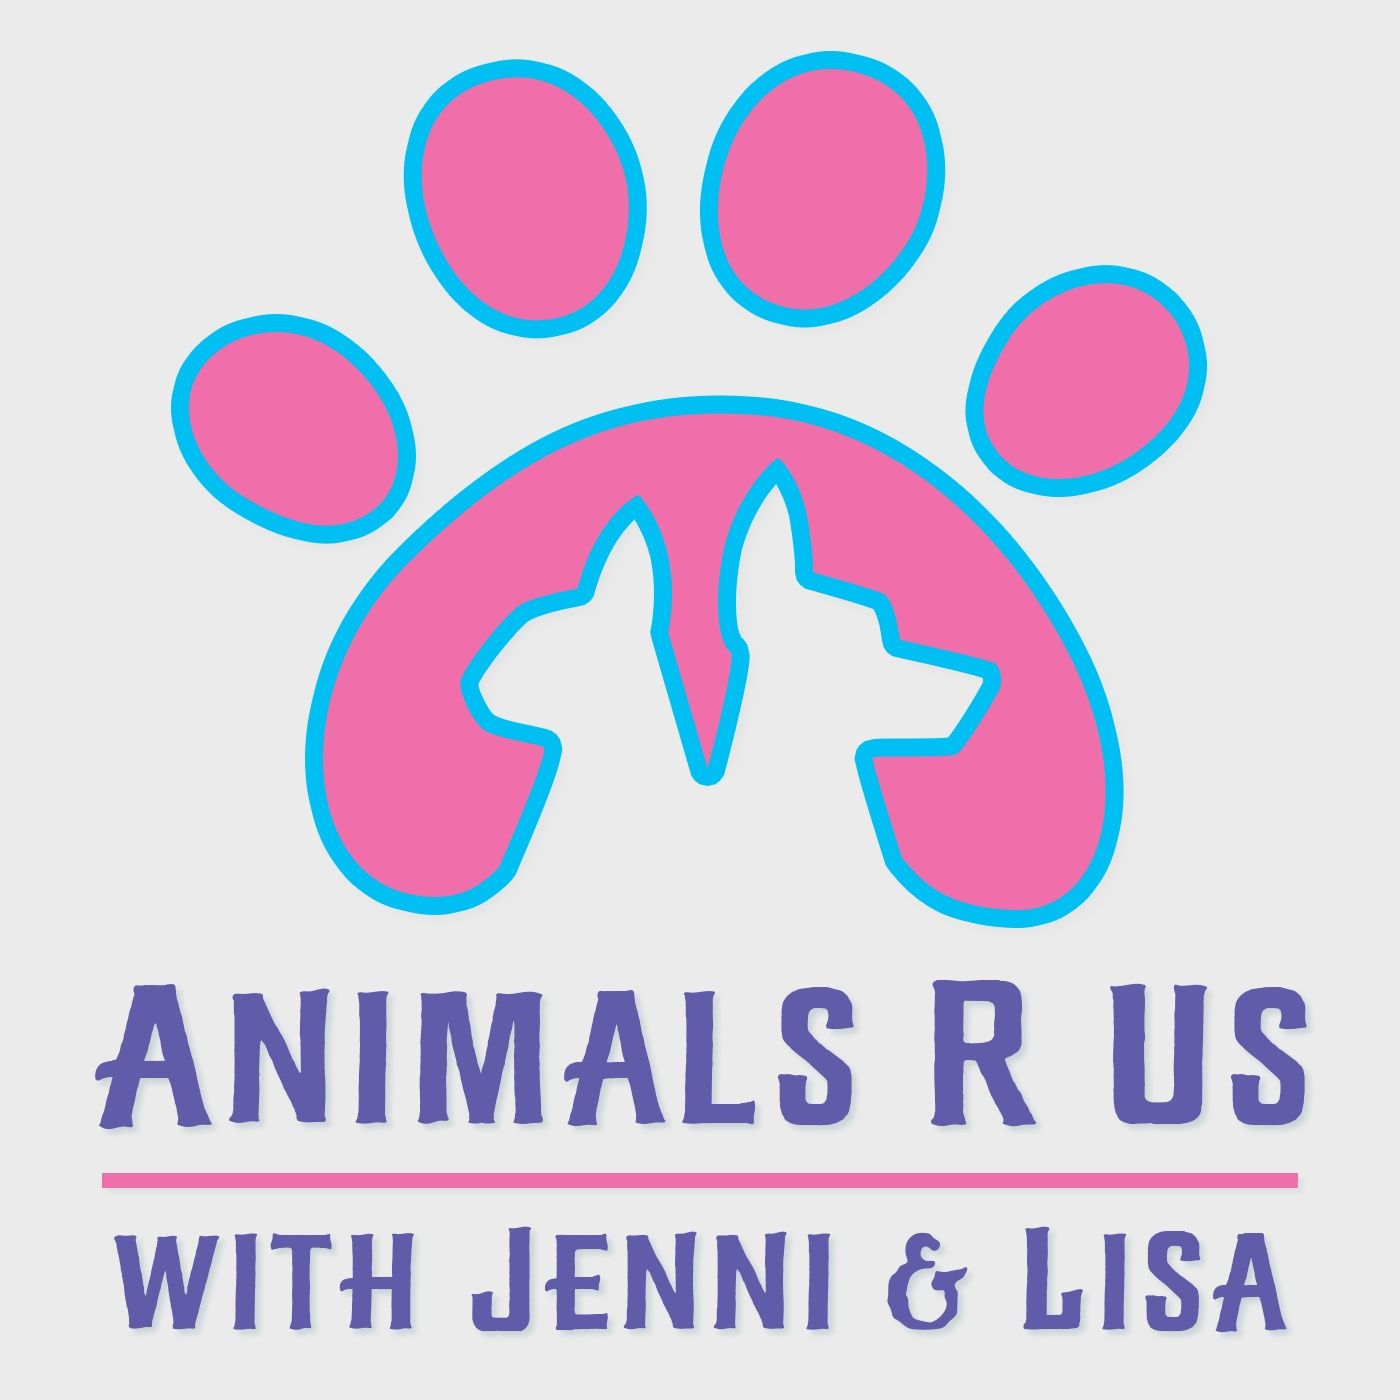 Episode 29: Warrior Canine Connection, Pet-Sitter Horror Stories & Animal Tales